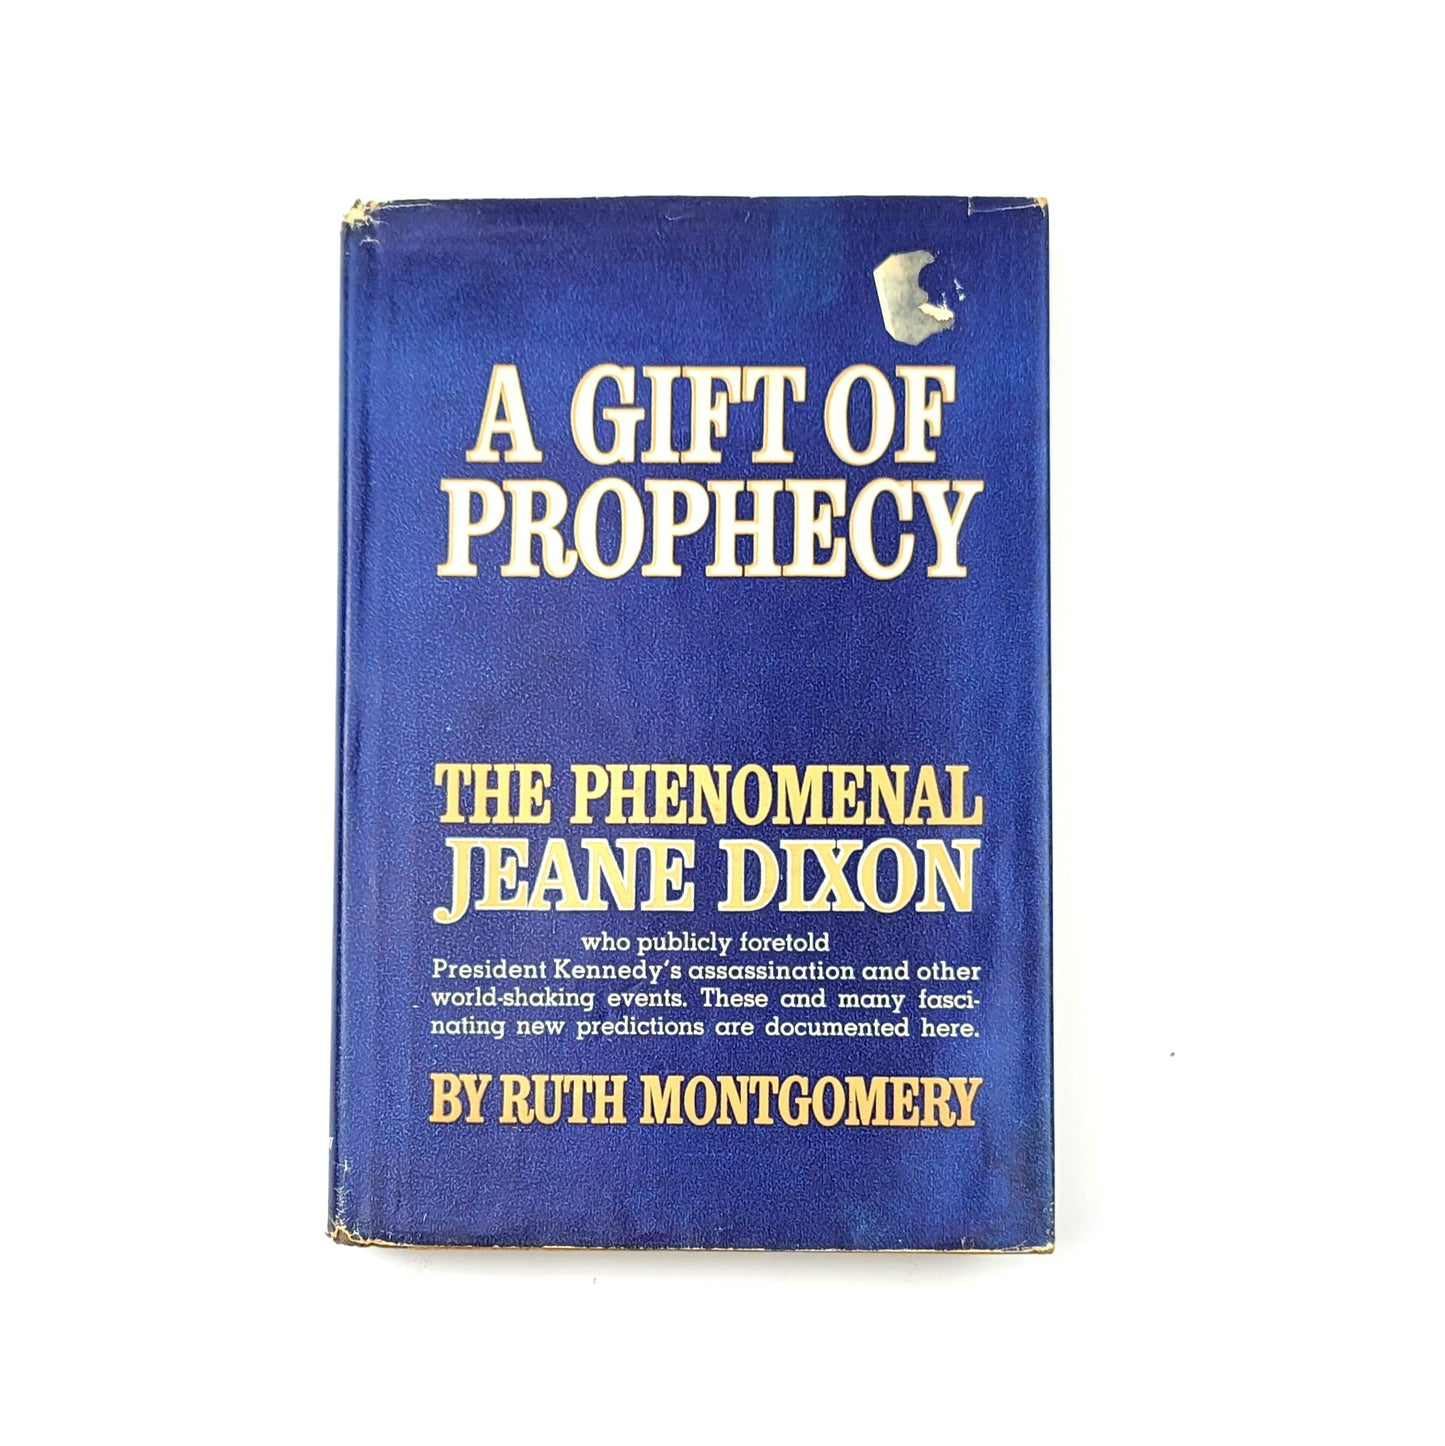 A Gift of Prophecy-The Phenomenal Jeane Dixon by Ruth Montgomery